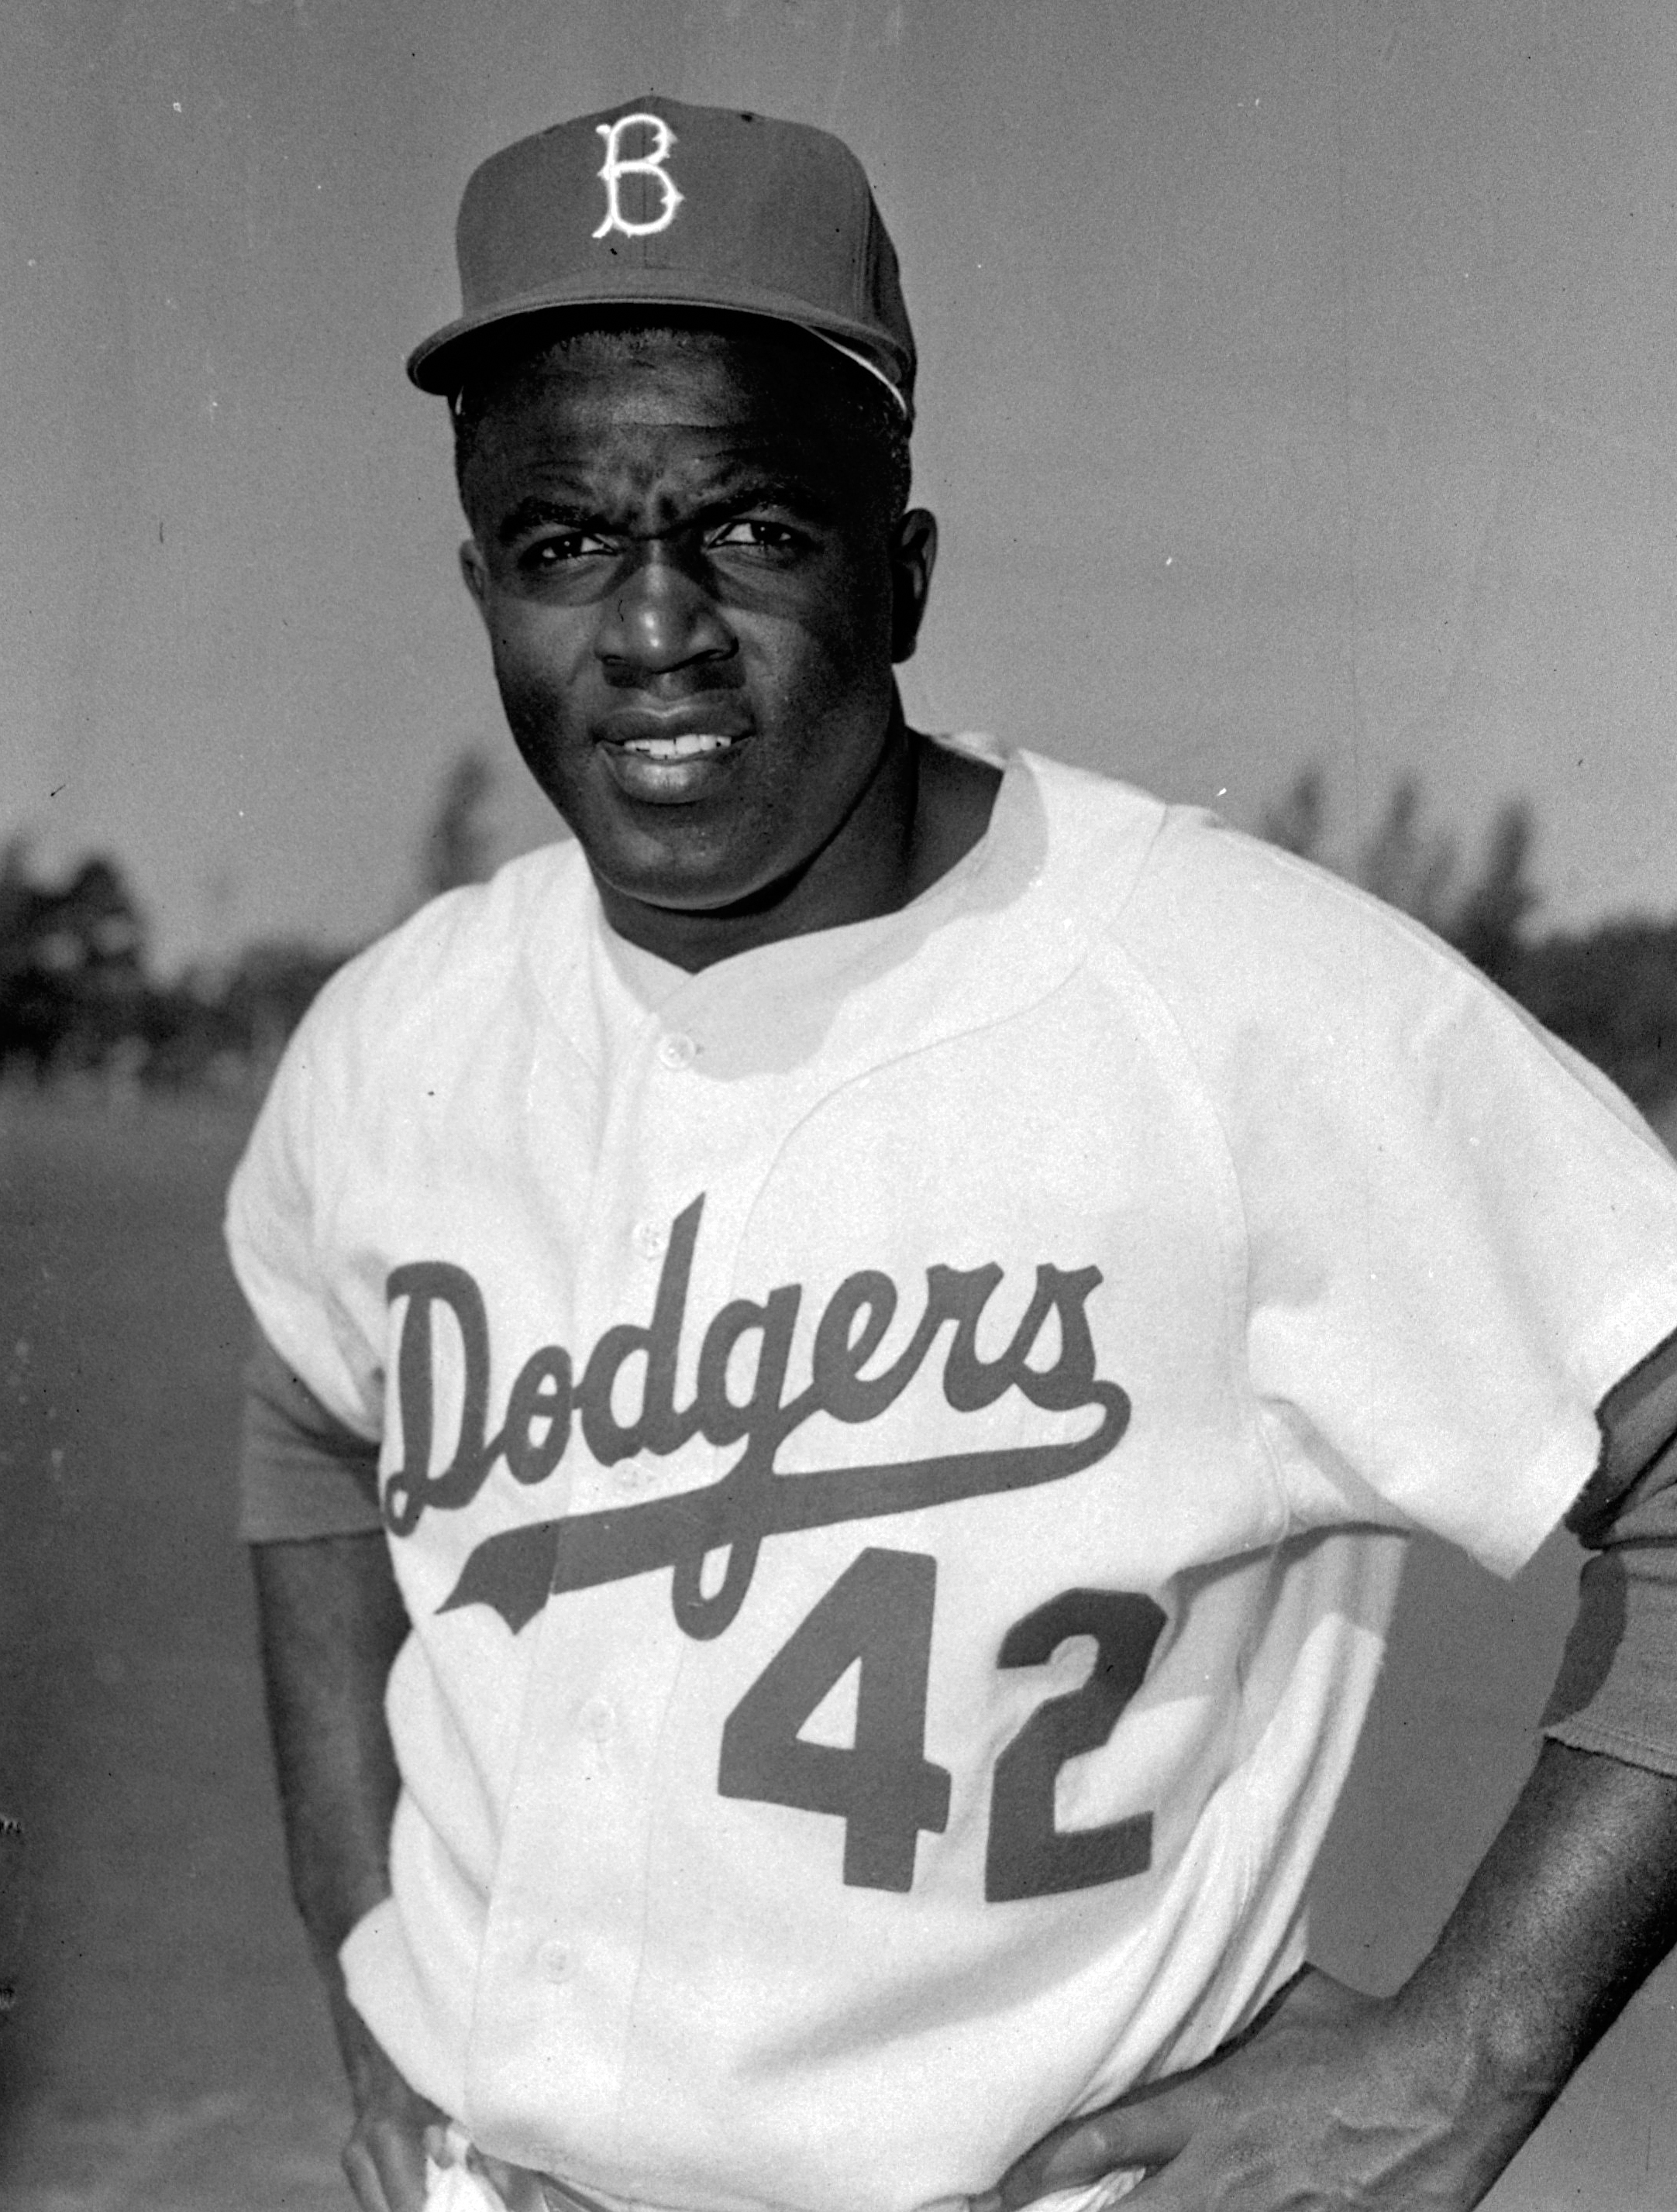 Now honoring No. 42: Jackie Robinson Day in majors - The San Diego